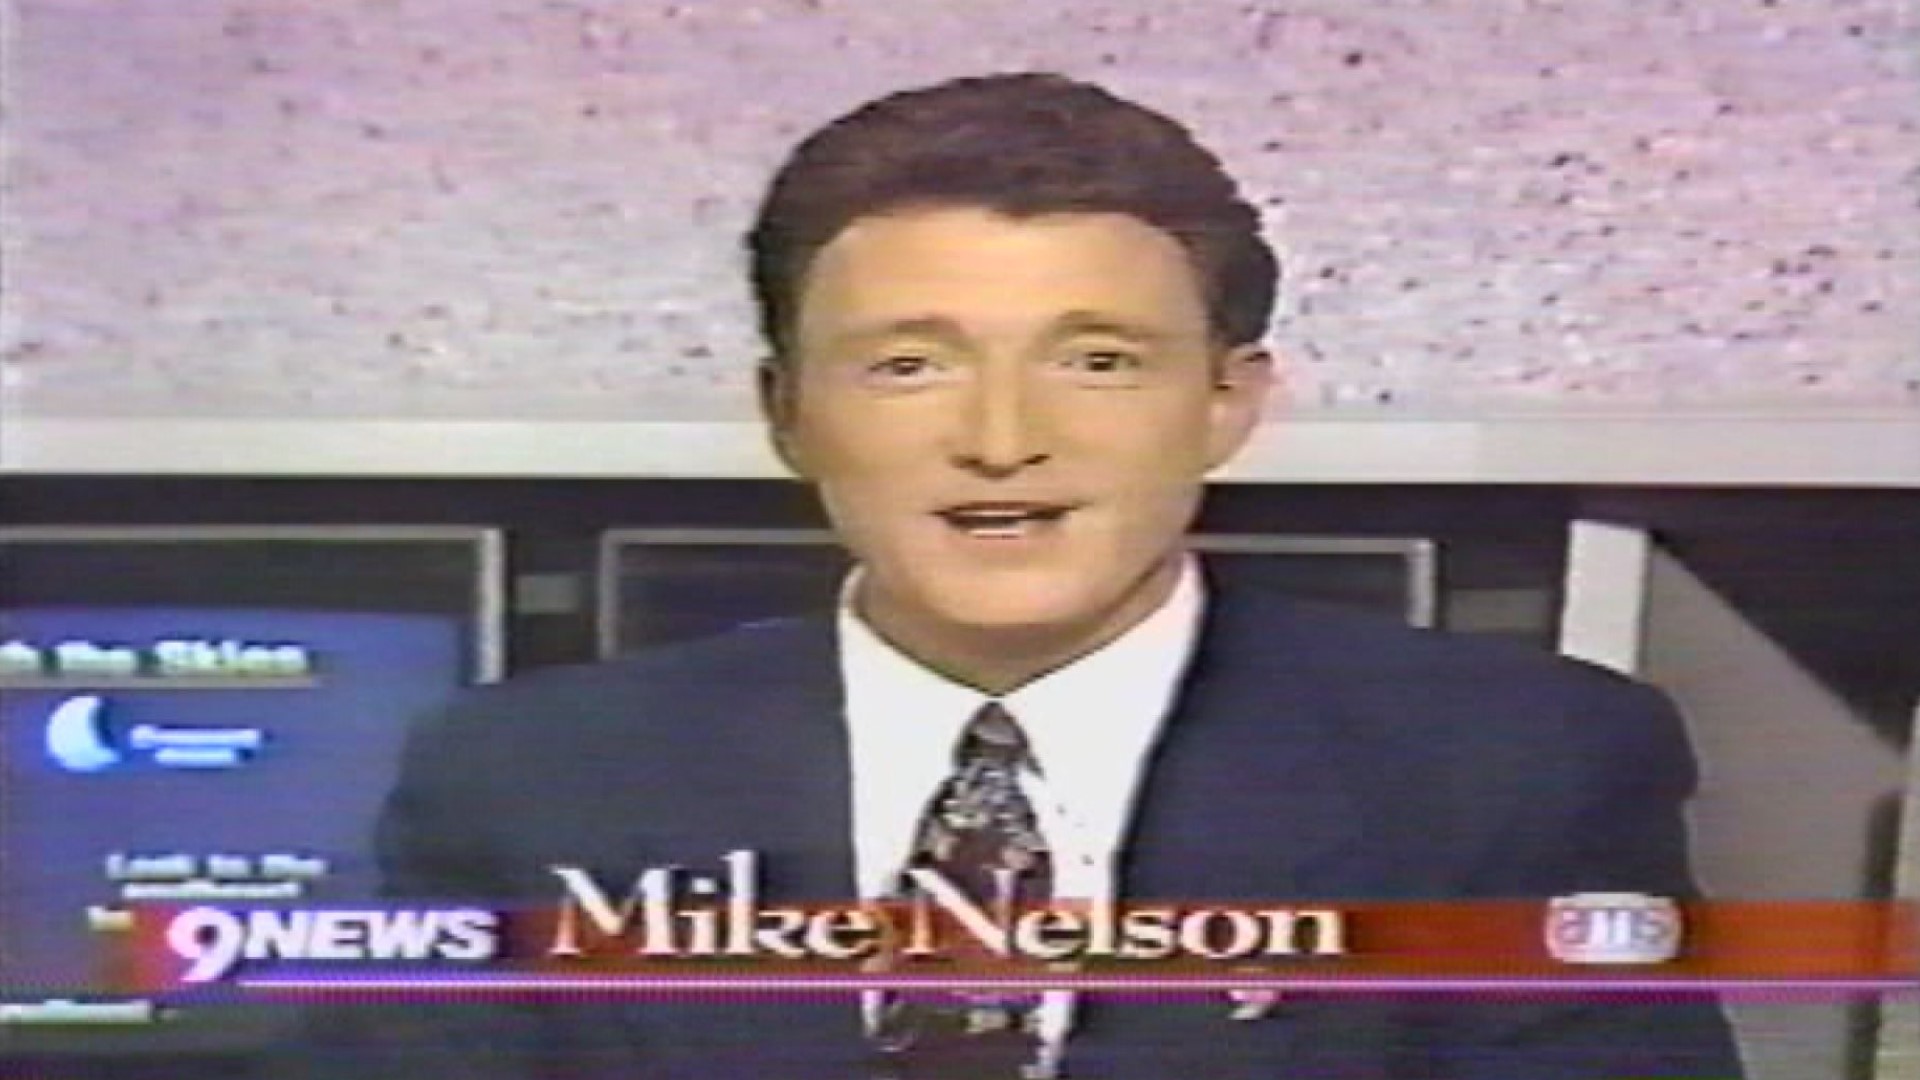 Mike Nelson was the Chief Meteorologist at 9NEWS KUSA from 1991 to 2004.